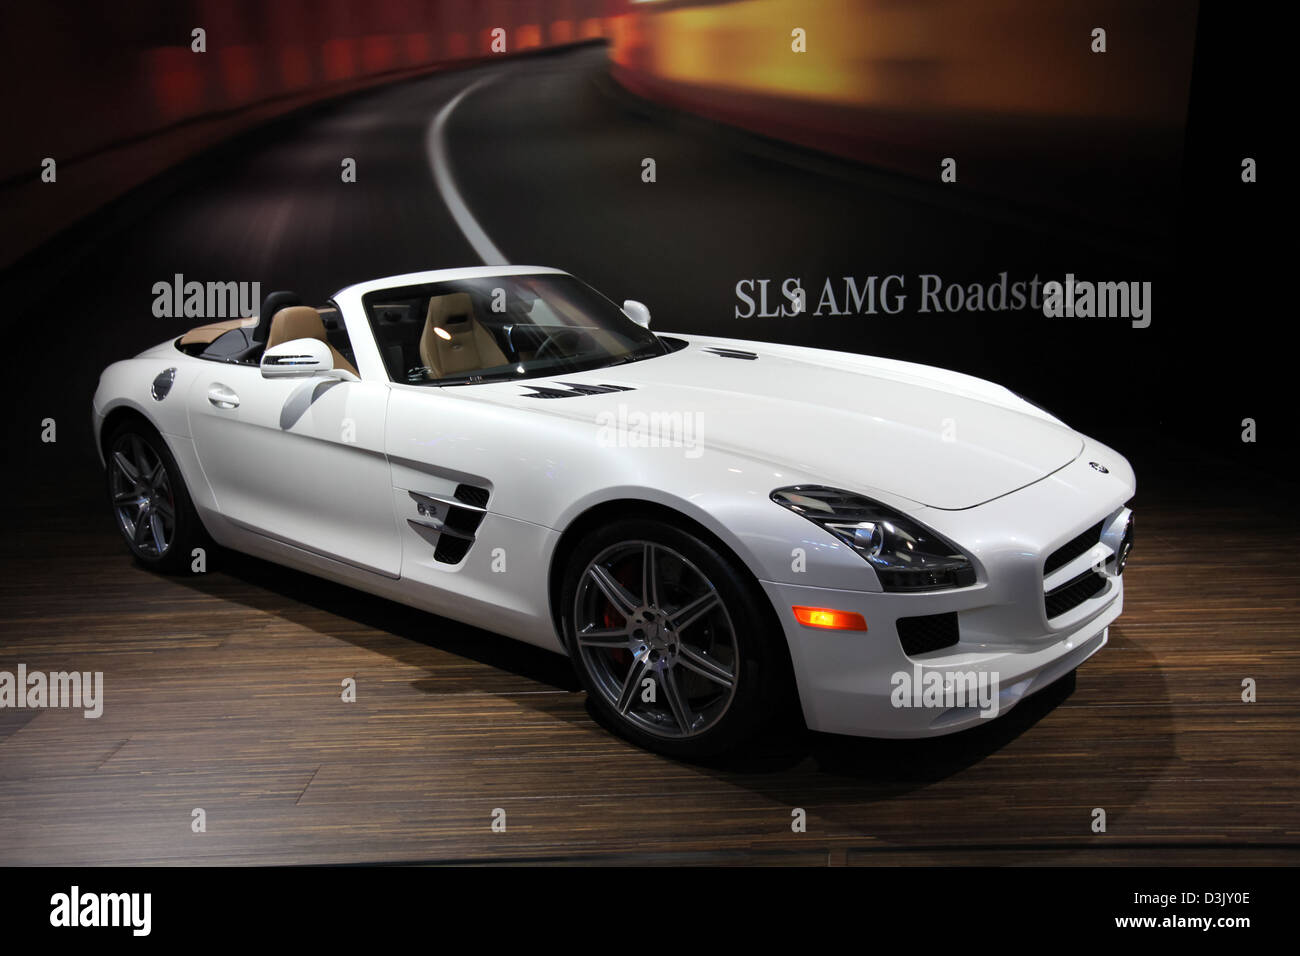 Mercedes Benz SLS AMG Roadster sports coupe Stock Photo